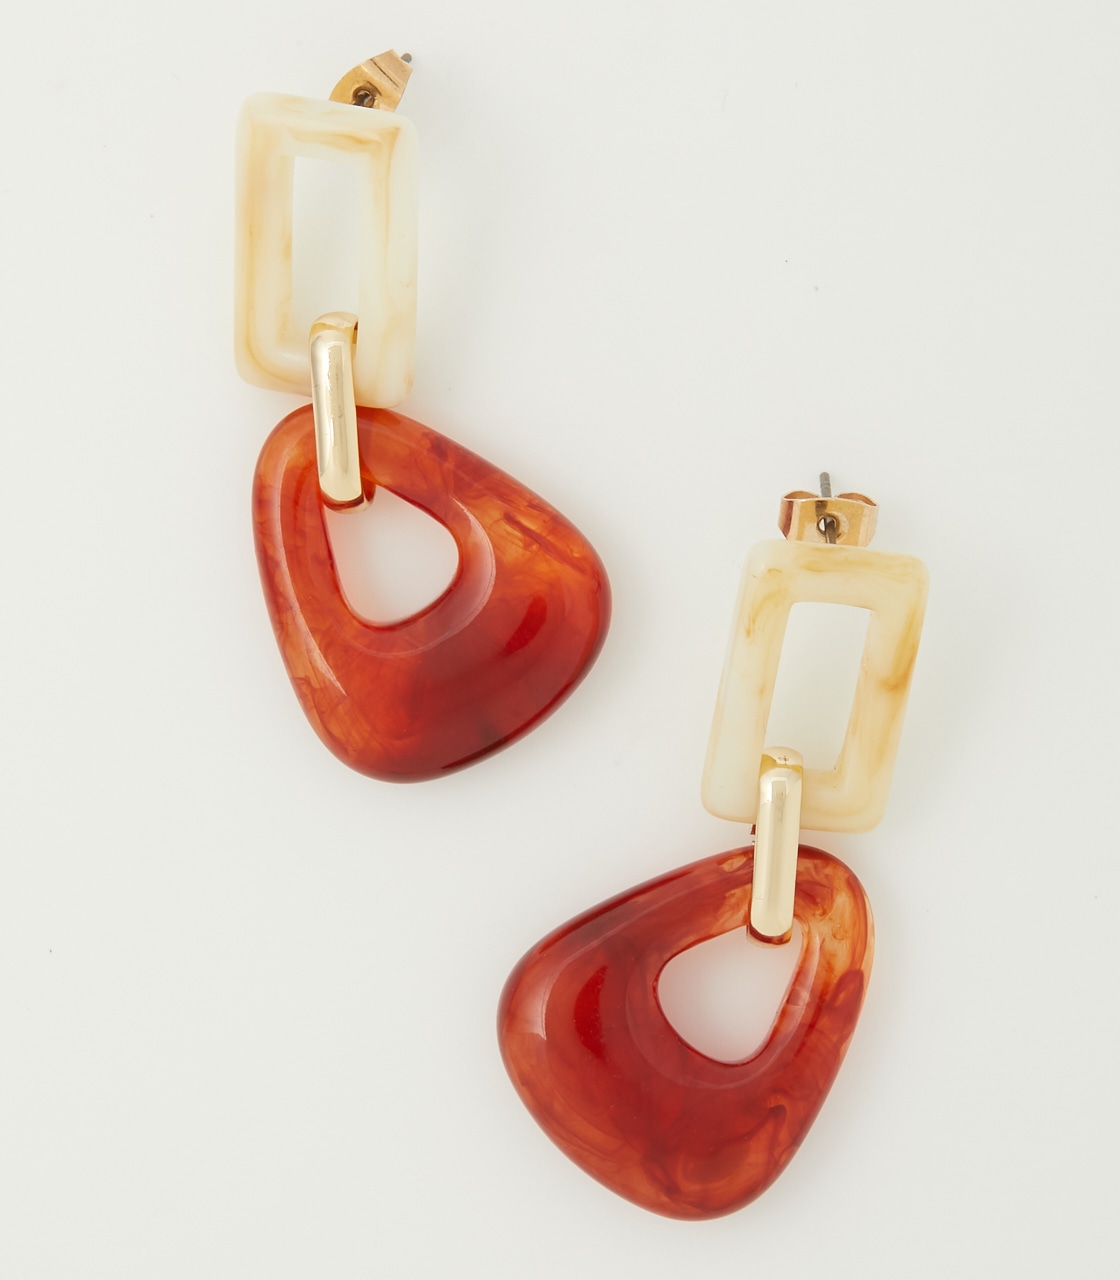 BICOLOR MARBLE EARRINGS/バイカラーマーブルピアス 詳細画像 柄ORG 3